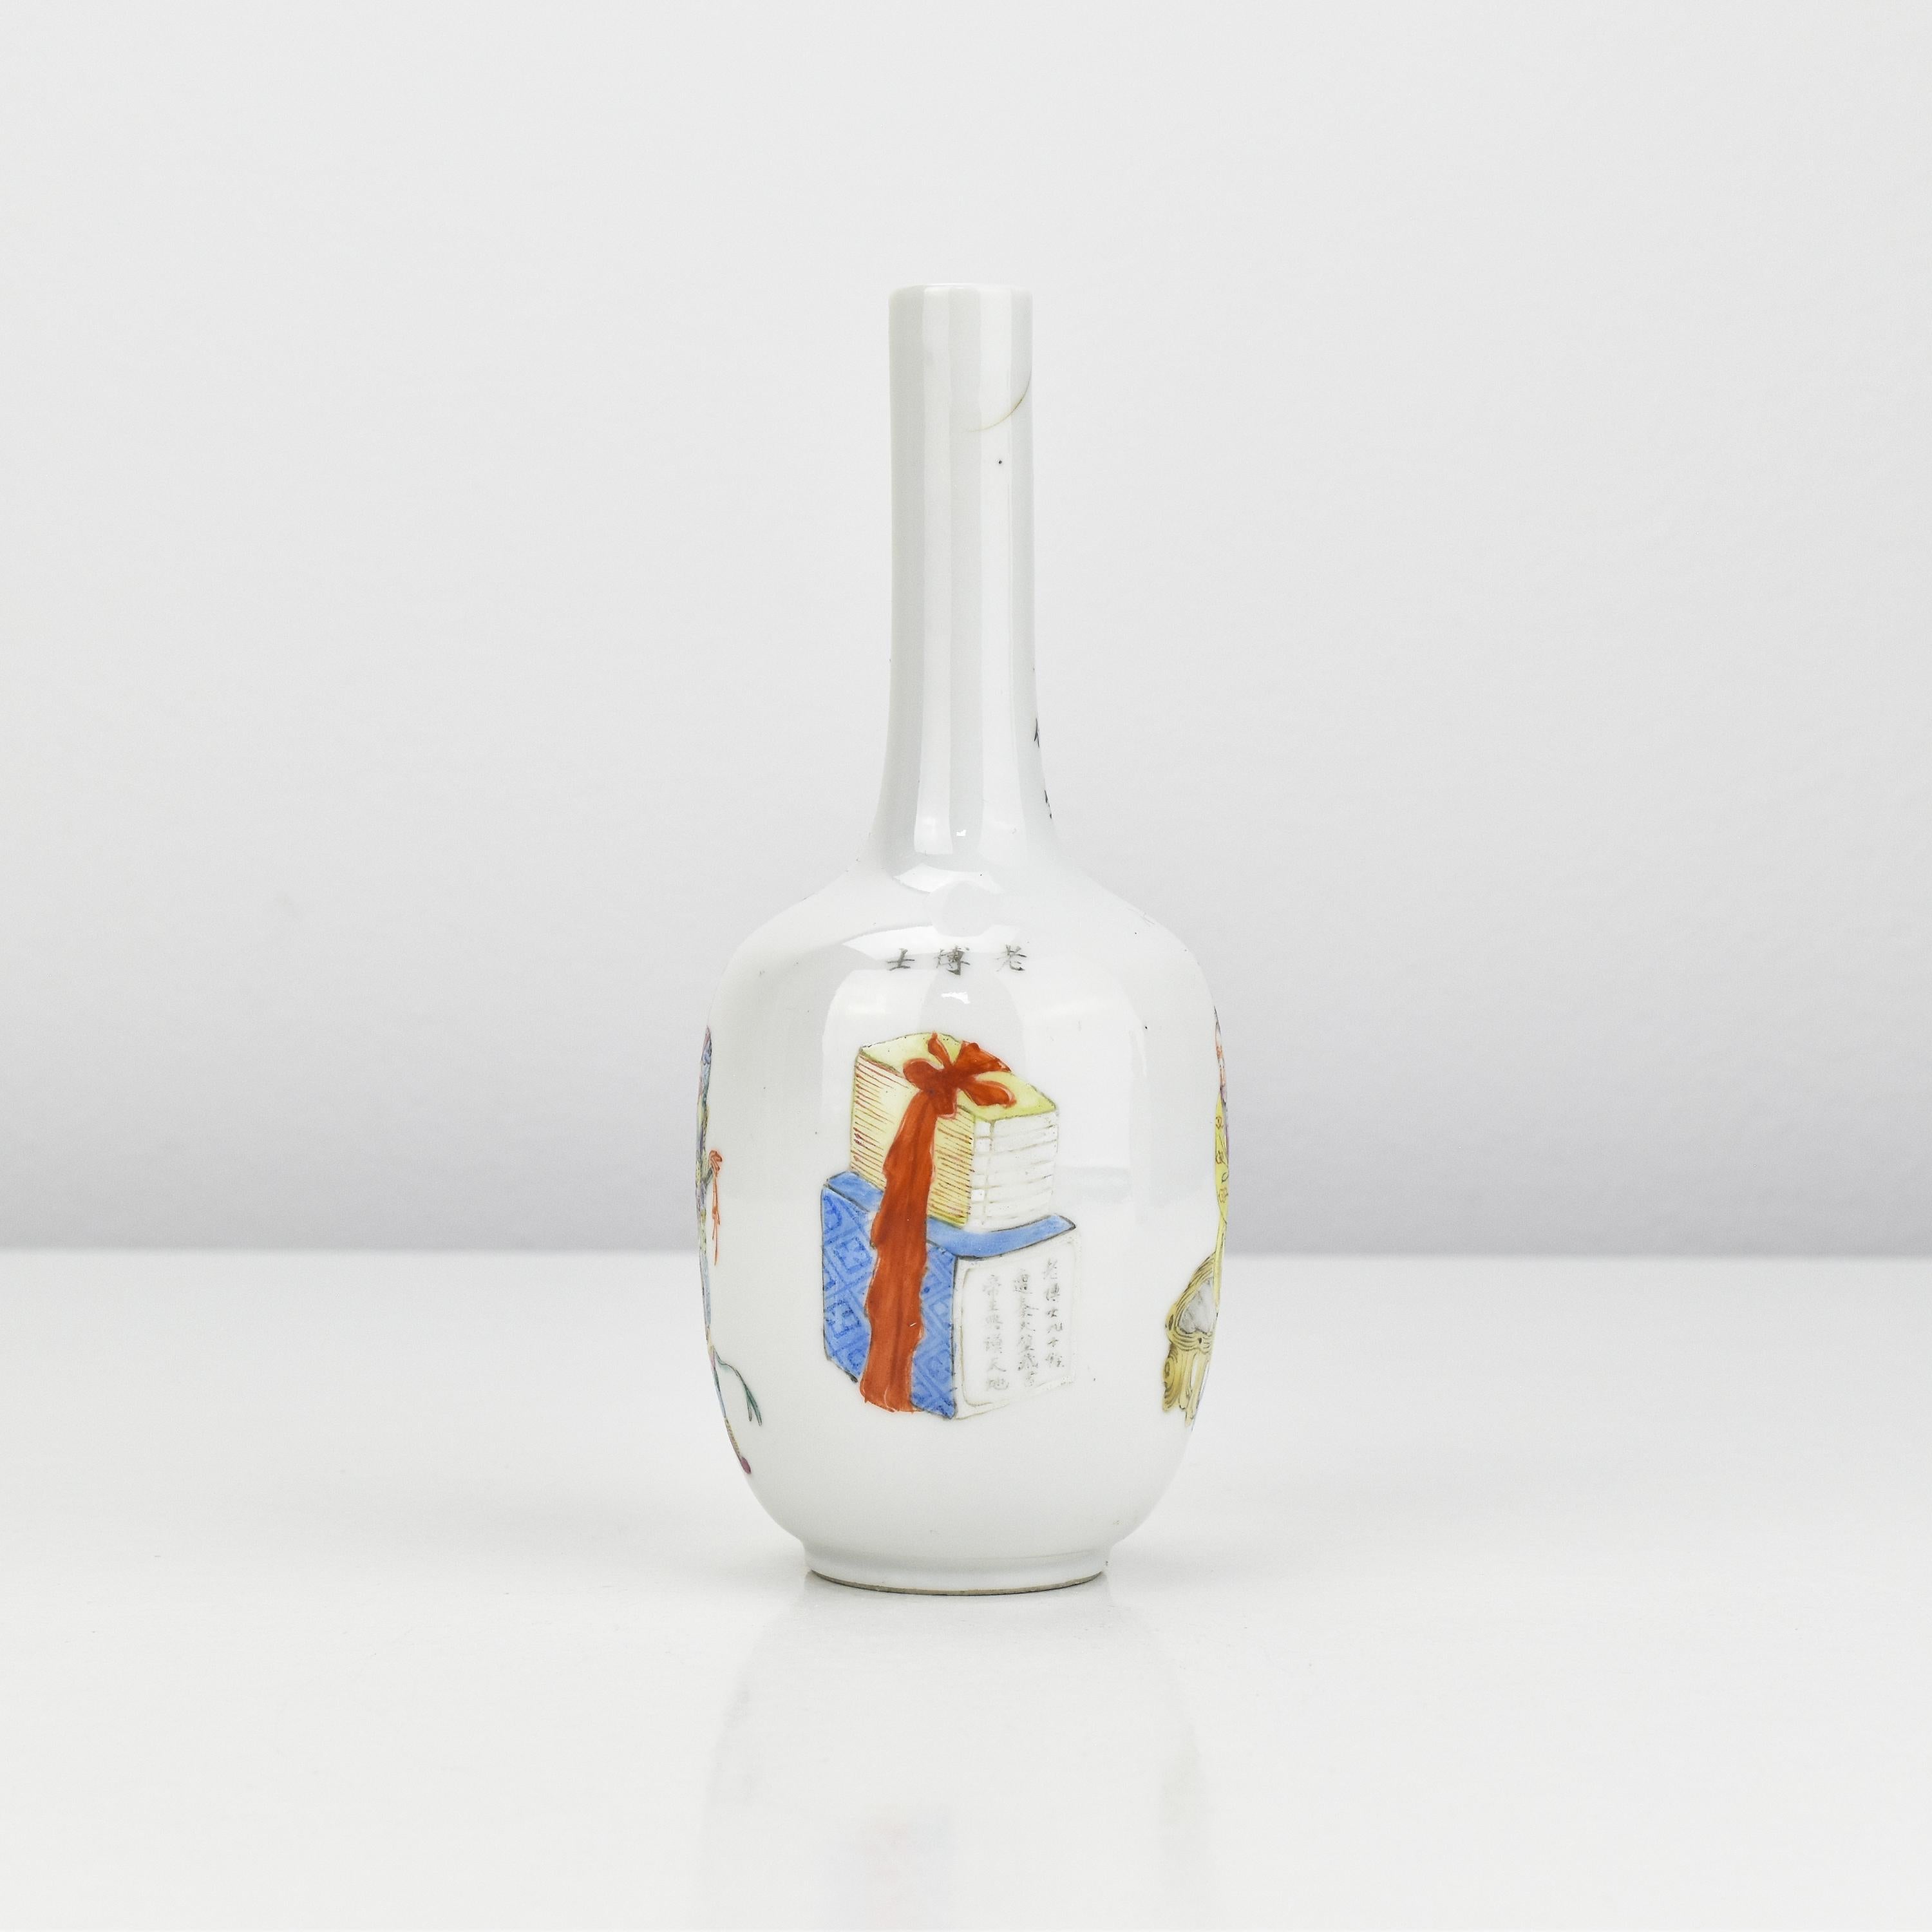 Antique Chinese Famille Rose Vase with Hand-Painted Enamels and Inscription - Exquisite Artwork from the Daoguang Period

This extremely thin pottered antique Chinese Famille Rose vase originates from the Daoguang period of the Qing Dynasty.